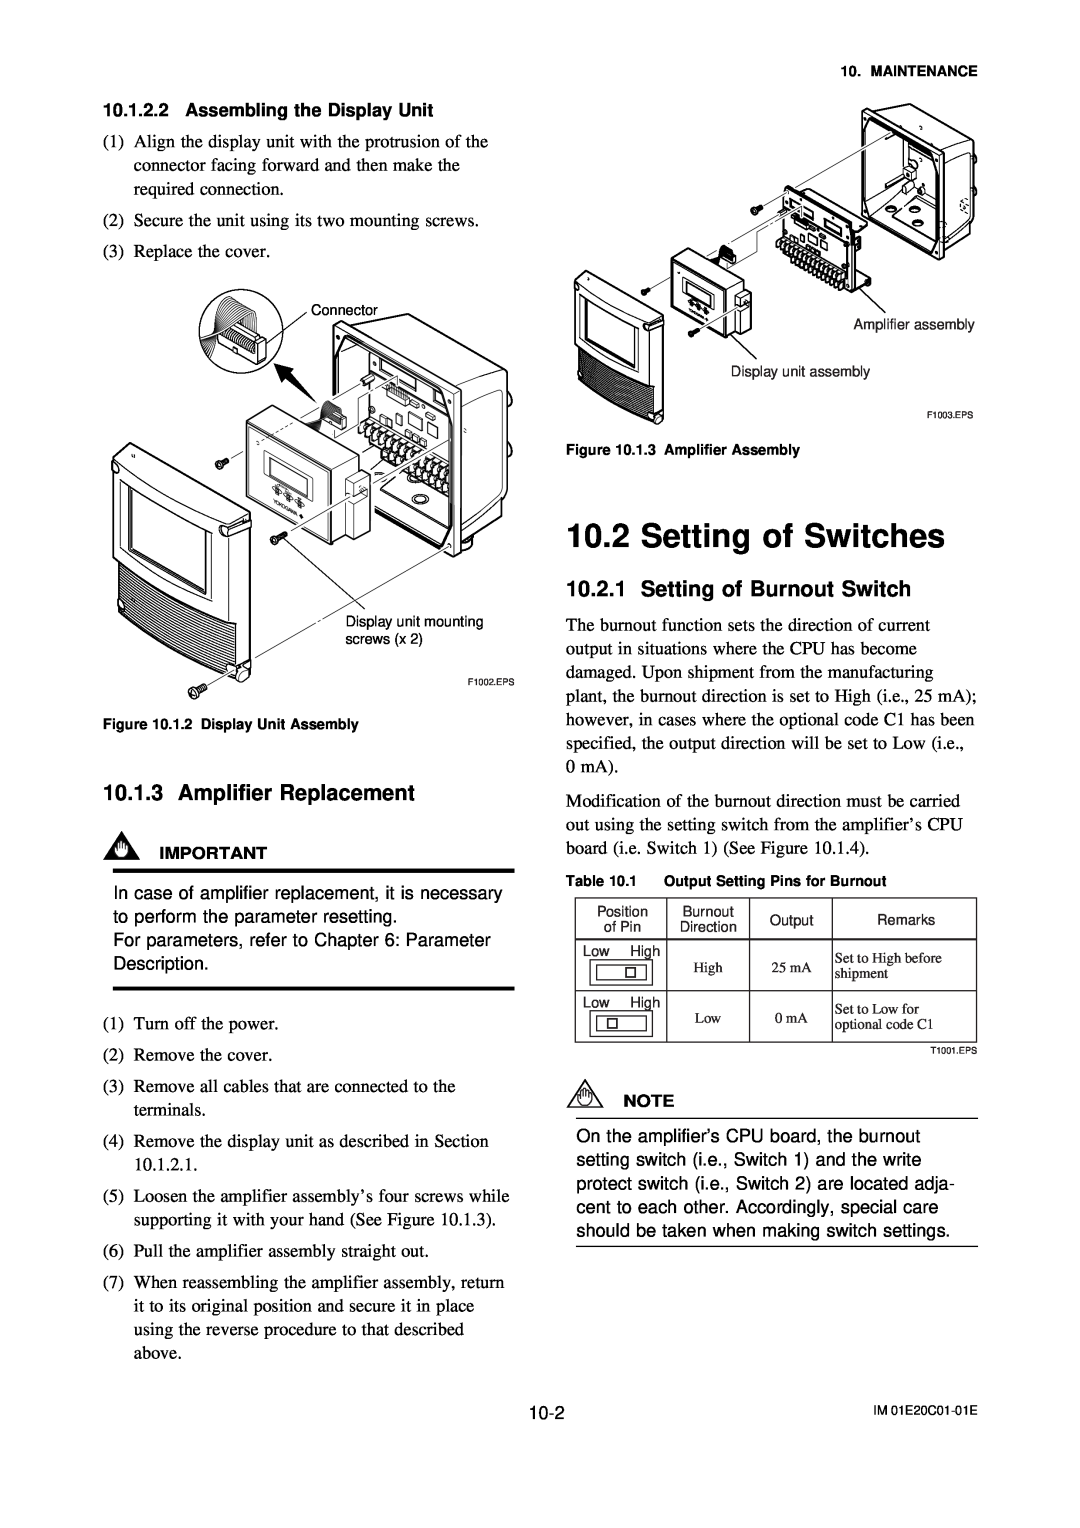 APC AXFA11G user manual Setting of Switches, Amplifier Replacement, Setting of Burnout Switch, Assembling the Display Unit 